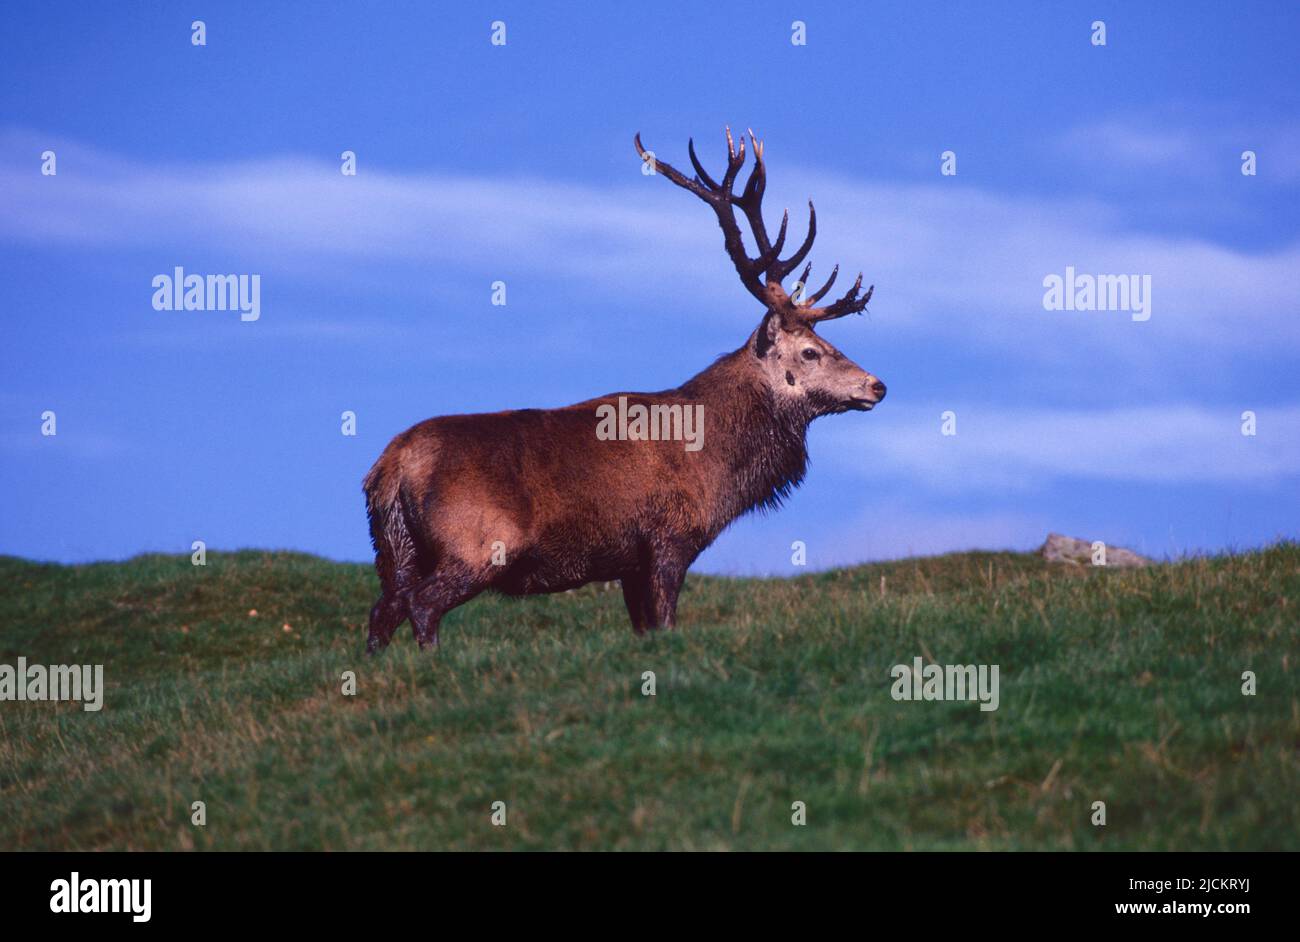 A muddy red deer stag in the Scottish Highlands, UK. Stock Photo